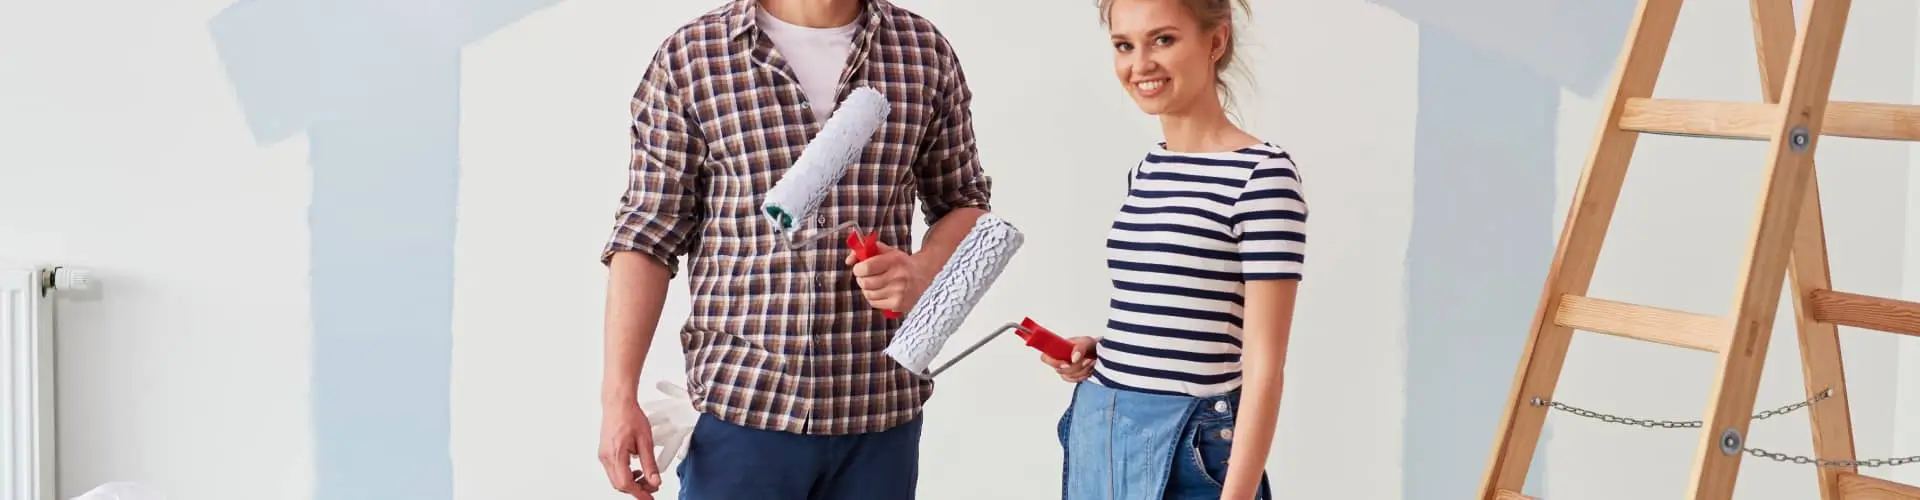 Two people standing with paint rollers ready for home improvement.